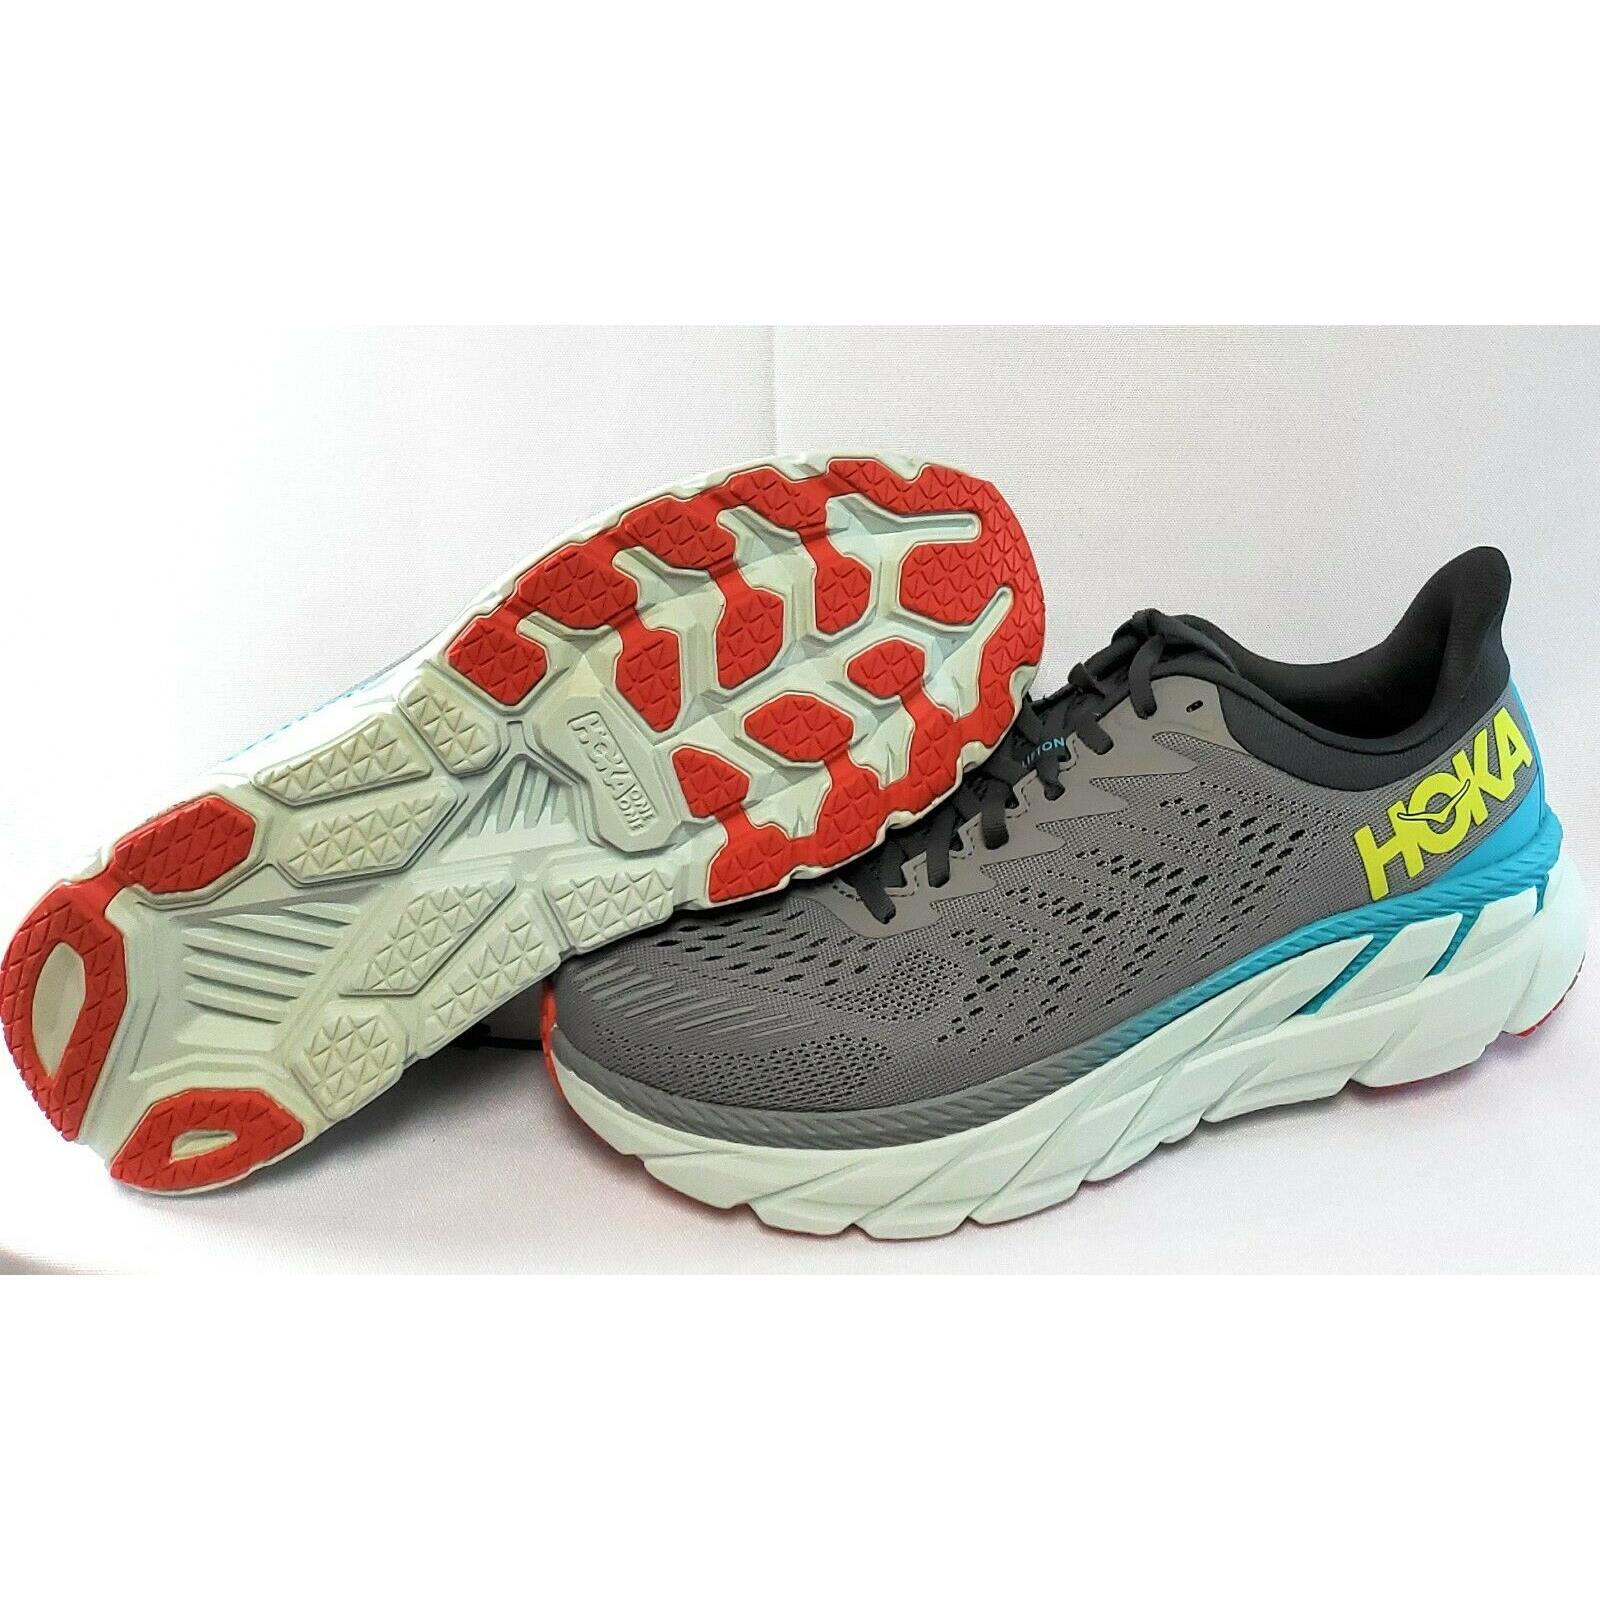 Mens Hoka One One Clifton 7 1110508 Wdds Dove Shadow Grey Running Sneakers Shoes - Grey